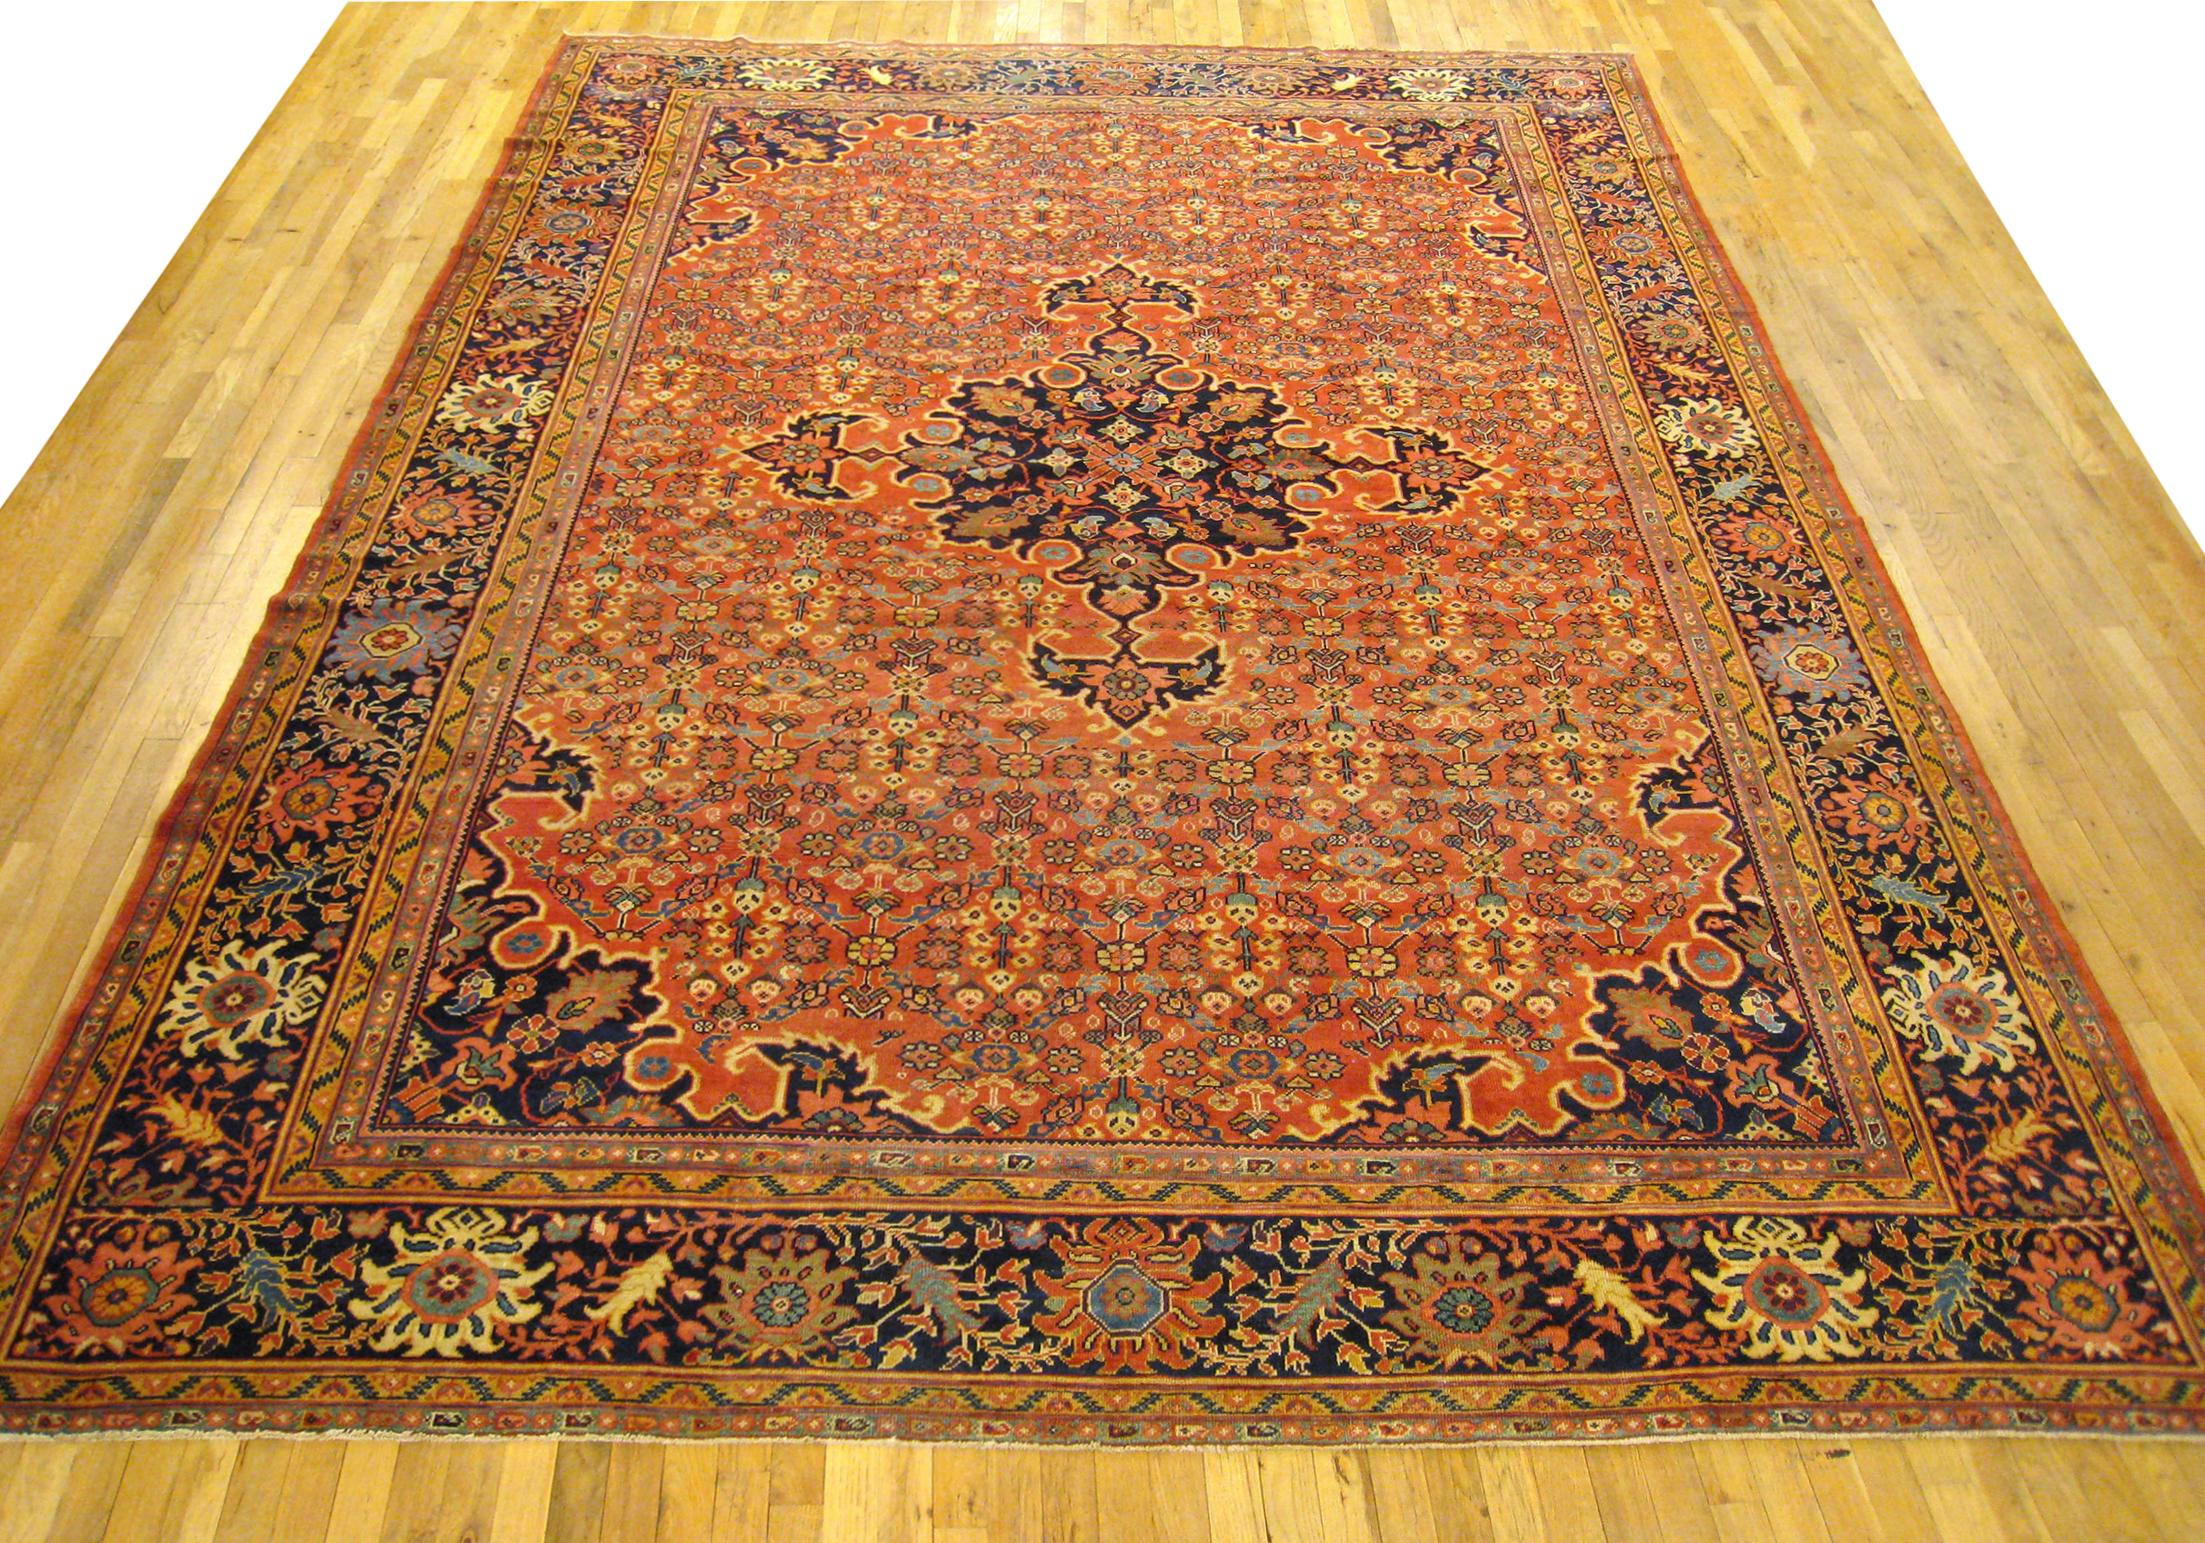 Antique Persian Sultanabad Rug, Room size, circa 1910

A one-of-a-kind antique Persian Sultanabad oriental carpet, hand-knotted with short wool pile. This lovely hand-knotted wool rug features a central medallion on a coral primary field, with a